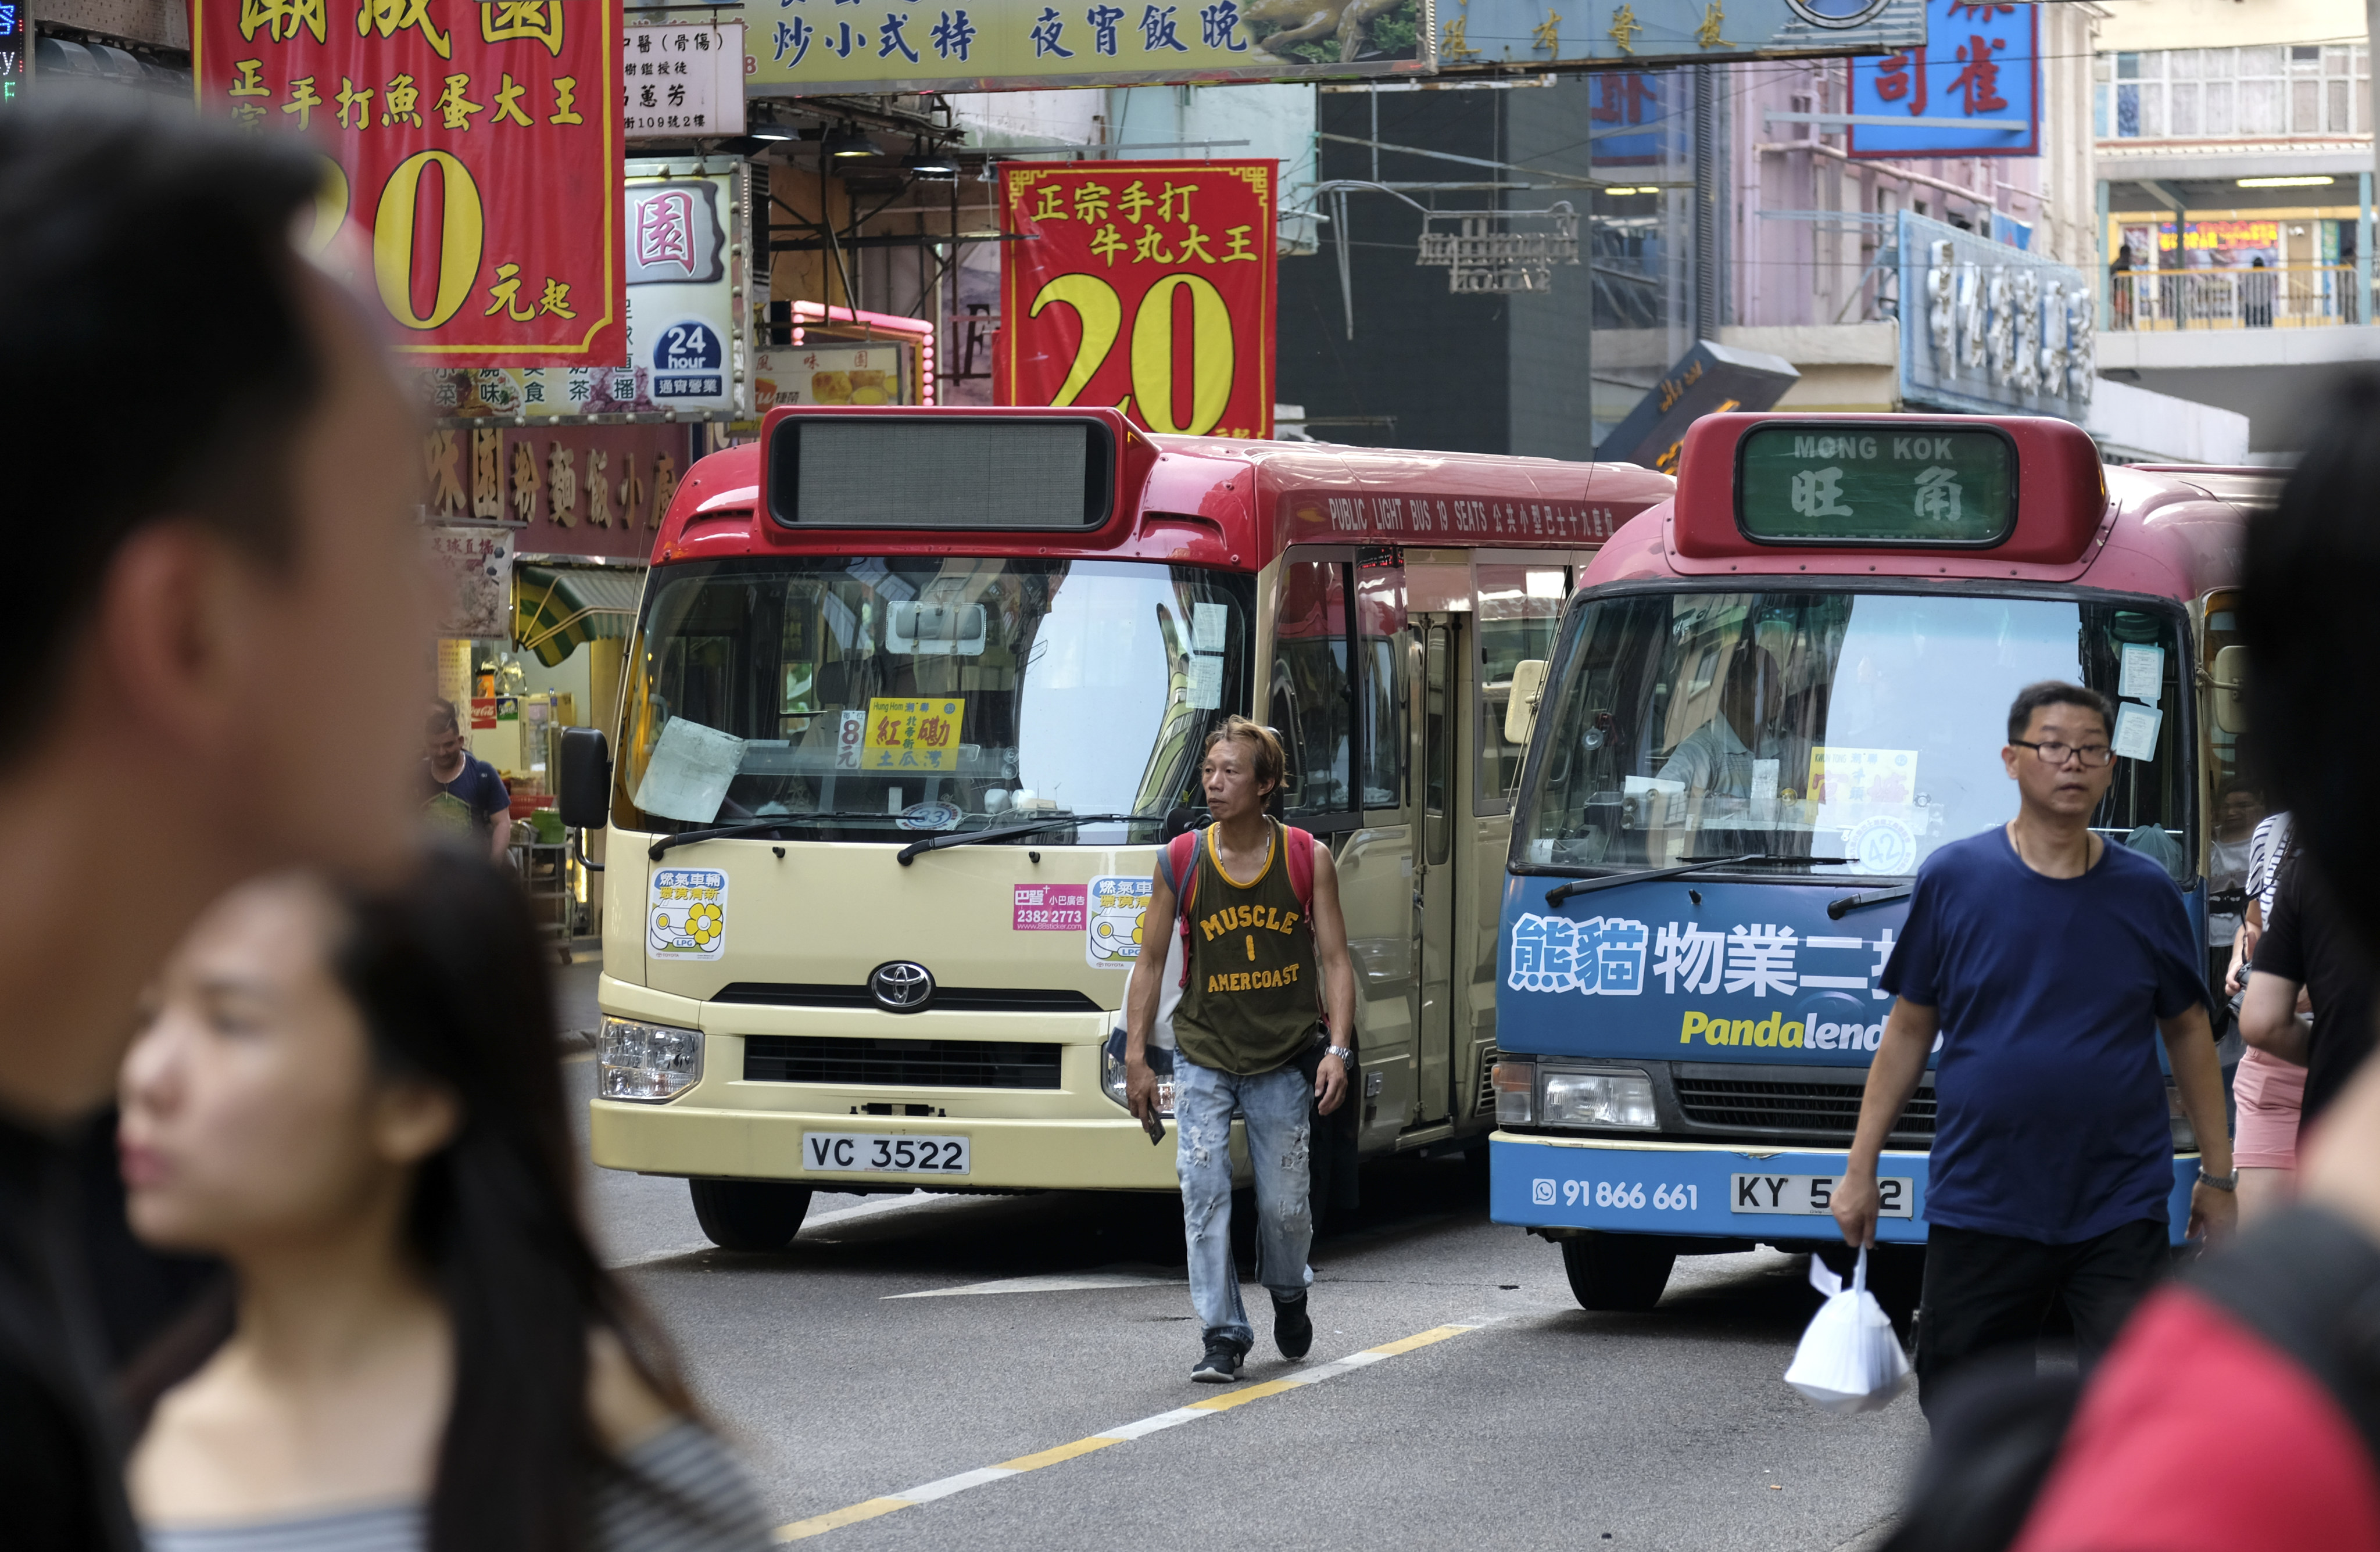 Banks have towed away about 100 minibuses, according to operators. Photo: Fung Chang